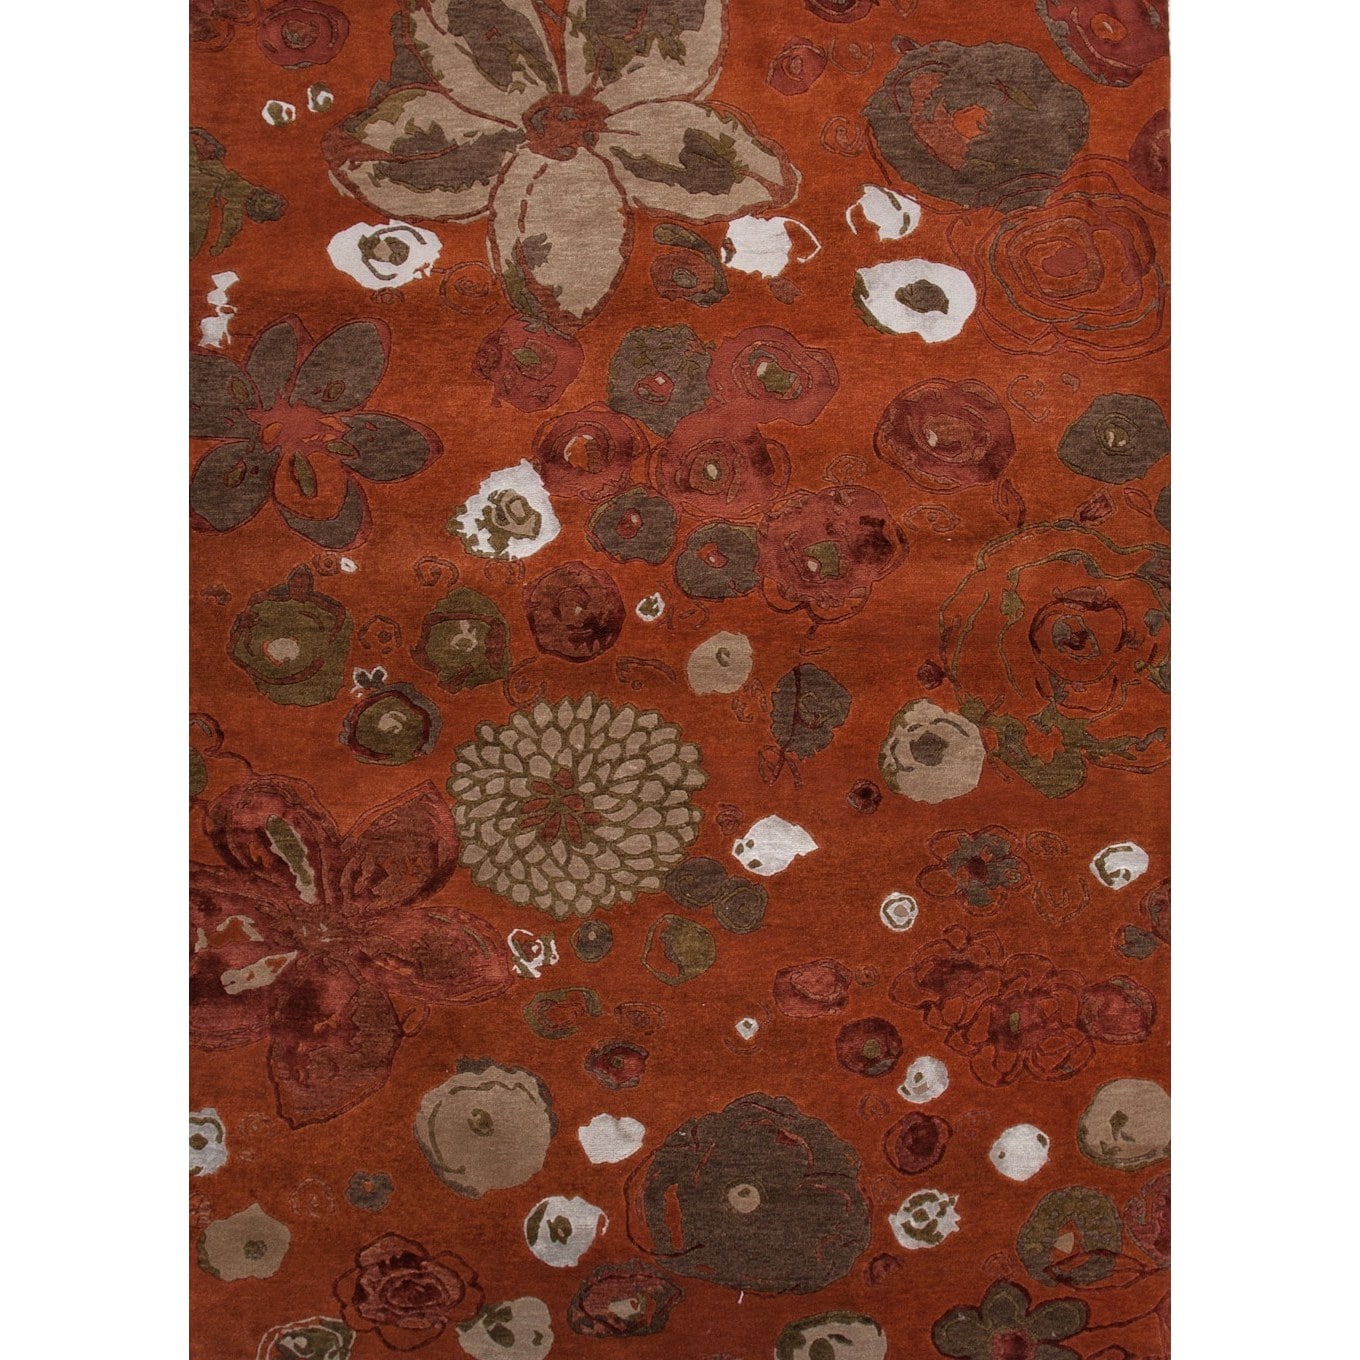 Hand knotted Red/ Orange Floral Pattern Wool/ Silk Rug (56 X 86)